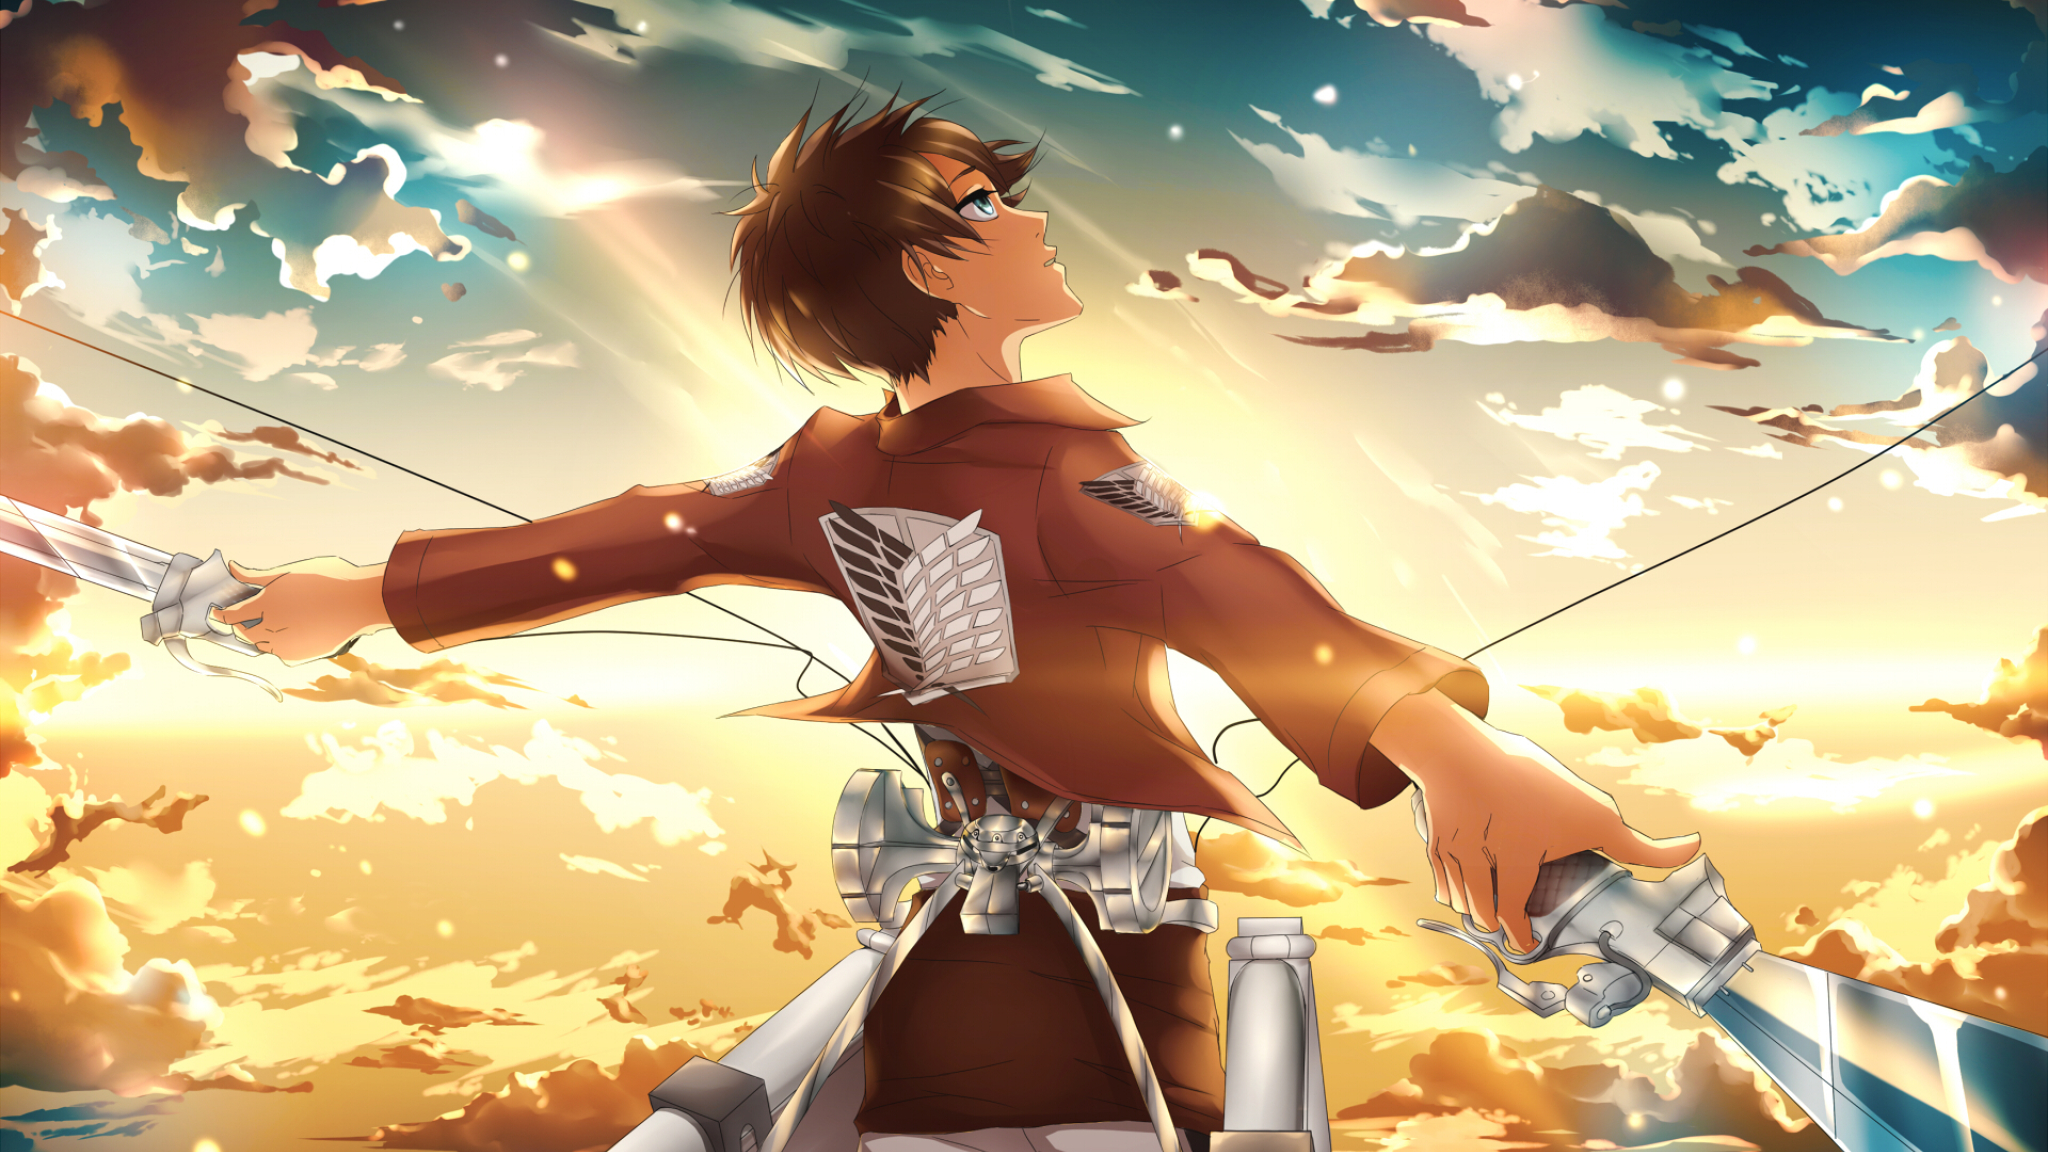 shingeki no kyojin eren jaeger man a2hlbJSZmpqtpaSklGdlaW2tZmZqZw - {{Wondering|Questioning} {How To|Easy Methods To|Find Out How To|How One Can|How You Can|Learn How To|Methods To|The Best Way To|The Right Way To|The Way To|Tips On How To} Make Your Frequency Jammer Rock? {Read|Learn} This!|{Who Is|Who's} Your Frequency Jammer {Customer|Buyer}?|{Where|The Place} {To Start|To Begin|To Start Out} With Frequency Jammer?|{Where|The Place} Will Frequency Jammer Be 6 Months From Now?|{Where|The Place} Is {The Best|One Of The Best|The Most Effective|The Perfect|The Very Best} Frequency Jammer?|{Where|The Place} Can {You Find|You Discover} Free Frequency Jammer {Resources|Assets|Sources}|{When You|If You|Once You|Whenever You|While You} Ask {People|Folks|Individuals} About Frequency Jammer {This Is|That Is} What They {Answer|Reply}|{What Is|What's} Frequency Jammer {And How|And The Way} Does It Work?|{Want|Need} {More|Extra} Out Of Your Life? Frequency Jammer, Frequency Jammer, Frequency Jammer!|{Want|Need} {More Money|Extra Money|More Cash}? {Start|Begin} Frequency Jammer|{Want To|Need To|Wish To} Step Up Your Frequency Jammer? {You Need To|It Is Advisable|It Is Advisable To|It's Essential|It's Essential To|It's Good To|It's Worthwhile To|That You Must|You Could|You Have To|You Might Want To|You Must|You Should|You Want To|You'll Want To} {Read|Learn} This First|{Want A|Desire A|Need A} Thriving {Business|Enterprise}? {Focus On|Concentrate On|Deal With|Give Attention To} Frequency Jammer!|{Thinking About|Desirous About|Eager About|Enthusiastic About|Excited About|Fascinated About|Fascinated By|Fascinated With|Interested By|Occupied With|Serious About} Frequency Jammer? 10 {Reasons Why|Explanation Why|The Explanation Why|The Reason Why} {It's Time To|It Is Time To} {Stop|Cease}!|{Should|Ought To} Fixing Frequency Jammer Take 60 Steps?|{Remarkable|Exceptional|Outstanding} {Website|Web Site|Webpage} - Frequency Jammer Will {Help You|Aid You|Allow You To|Assist You|Assist You To|Enable You|Enable You To|Make It Easier To|Provide Help To|Show You How To} Get There|{Read|Learn} This {To Change|To Alter|To Vary} {How You|The Way You} Frequency Jammer|{Need|Want} {More|Extra} Time? {Read|Learn} These {Tips To|Tricks To} {Eliminate|Eradicate|Get Rid Of|Remove} Frequency Jammer|{Need|Want} {More|Extra} Inspiration With Frequency Jammer? {Read|Learn} This!|{Learn|Be Taught|Study} {Exactly|Precisely} How We Made Frequency Jammer {Last|Final} Month|{Learn|Be Taught|Study} {Exactly|Precisely} How I Improved Frequency Jammer In 2 Days|{Learn|Be Taught|Study} {Anything|Something} New From Frequency Jammer {Lately|Currently|Recently|These Days}? We {Asked|Requested}, You Answered!|{Learn How|Find Out How|Learn The Way} {To Start|To Begin|To Start Out} Frequency Jammer|{Learn How To|Discover Ways To|Learn To} Frequency Jammer Persuasively In {3|Three} {Easy|Simple|Straightforward} Steps|{I Don't|I Do Not} {Want To|Need To|Wish To} Spend This {Much|A Lot} Time On Frequency Jammer. How About You?|{How You Can|How One Can} (Do) Frequency Jammer {Almost|Nearly|Virtually} {Instantly|Immediately}|{How You Can|How One Can} (Do) Frequency Jammer In 24 Hours Or {Less|Much Less} {For Free|At No Cost|Free Of Charge|Totally Free|Without Cost|Without Spending A Dime}|{Here Are|Listed Below Are|Listed Here Are} {4|Four} Frequency Jammer {Tactics|Techniques|Ways} {Everyone|Everybody} Believes In. Which One Do You {Prefer|Choose|Desire|Favor|Want}?|{Have You|Have You Ever} Heard? Frequency Jammer Is Your {Best|Finest|Greatest} {Bet|Guess|Wager} To {Grow|Develop}|{Got|Acquired|Bought|Obtained|Received} {Stuck|Caught}? {Try|Attempt|Strive} These {Tips To|Tricks To} Streamline Your Frequency Jammer|{Find|Discover} Out Now, What {Should You|Do You Have To|Must You} Do For {Fast|Quick} Frequency Jammer?|{Find Out How|Learn How|Learn The Way} I Cured My Frequency Jammer In 2 Days|{Fear|Concern|Worry}? Not If {You Use|You Employ|You Utilize} Frequency Jammer {The Right|The Appropriate|The Best|The Correct|The Fitting|The Precise|The Proper|The Suitable} {Way|Approach|Manner|Means|Method}!|{Could|May|Might} This Report Be The Definitive {Answer|Reply} To Your Frequency Jammer?|{Can You|Are You Able To} {Pass|Cross|Go|Move} The Frequency Jammer {Test|Check|Take A Look At}?|{Can You|Are You Able To} Spot The A Frequency Jammer {Pro|Professional}?|{3|Three} {Kinds Of|Sorts Of} Frequency Jammer: Which One Will {Make The Most|Take Advantage Of} {Money|Cash}?|{3|4|5|6|7|8|9|10|Three|Four|Five|Six|Seven|Eight|Nine|Ten} Amazing Tricks To Get The Most Out Of Your Frequency Jammer|You Want Frequency Jammer?|You Make These Frequency Jammer Mistakes?|Wondering How To Make Your Frequency Jammer Rock? Read This!|Will Frequency Jammer Ever Die?|Why {You Really Need|You Actually Need|You Really Want} (A) Frequency Jammer|Why {Most People|Most Individuals} {Will Never|Won't Ever} Be {Great|Nice} At Frequency Jammer|Why {It's|It Is} {Easier|Simpler} To Fail With Frequency Jammer Than You {Might|May|Would Possibly} {Think|Assume|Suppose}|Why {Everything|All The Pieces|All The Things|Every Little Thing|Every Part|Every Thing|The Whole Lot} You {Know About|Find Out About|Learn About} Frequency Jammer Is A Lie|Why You {Never|By No Means} See Frequency Jammer {That Actually|That Really|That Truly} Works|Why You Need A Frequency Jammer|Why Some {People|Folks|Individuals} {Almost|Nearly|Virtually} {Always|All The Time|At All Times} Make/Save {Money|Cash} With Frequency Jammer|Why Frequency Jammer {Is No|Is Not Any|Isn't Any} {Friend|Buddy|Good Friend|Pal} To Small {Business|Enterprise}|Why Frequency Jammer {Doesn't|Does Not|Would Not} Work…For {Everyone|Everybody}|Why Frequency Jammer Succeeds|Why Frequency Jammer Is {The Only|The One} {Skill|Ability|Talent} {You Really Need|You Actually Need|You Really Want}|Why Frequency Jammer Is The Only Skill You Really Need|Why Frequency Jammer Is A Tactic Not {A Strategy|A Method|A Technique}|Why Nobody Is Talking About Frequency Jammer And What You Should Do Today|Why My Frequency Jammer {Is Better|Is Best|Is Healthier} Than Yours|Why Ignoring Frequency Jammer Will {Cost|Price|Value} You Time And {Sales|Gross Sales}|Why Have A Frequency Jammer?|Why Everyone Is Dead Wrong About Frequency Jammer And Why You Must Read This Report|Why Everybody Is Talking About Frequency Jammer...The Simple Truth Revealed|Why Almost Everything You've Learned About Frequency Jammer Is Wrong And What You Should Know|Who Else {Wants|Desires|Needs} {To Be Successful|To Achieve Success} With Frequency Jammer|Who Else {Wants|Desires|Needs} To {Enjoy|Get Pleasure From|Take Pleasure In} Frequency Jammer|Who Else {Wants|Desires|Needs} To Know The {Mystery|Thriller} Behind Frequency Jammer?|Who Else Wants To Learn About Frequency Jammer?|Where To Find Frequency Jammer|Where Is The Best Frequency Jammer?|When Professionals Run Into {Problems|Issues} With Frequency Jammer, {This Is|That Is} What They Do|When Frequency Jammer {Grow|Develop} Too {Quickly|Rapidly|Shortly}, {This Is|That Is} What {Happens|Occurs}|When Frequency Jammer {Competition|Competitors} {Is Good|Is Nice|Is Sweet}|When Frequency Jammer {Businesses|Companies} {Grow|Develop} Too {Quickly|Rapidly|Shortly}|When Frequency Jammer Means {More Than|Greater Than} {Money|Cash}|When Is {The Right|The Appropriate|The Best|The Correct|The Fitting|The Precise|The Proper|The Suitable} Time {To Start|To Begin|To Start Out} Frequency Jammer|What's {Wrong|Fallacious|Flawed|Improper|Incorrect|Mistaken|Unsuitable} With Frequency Jammer|What's {Right|Proper} About Frequency Jammer|What's Really Happening With Frequency Jammer|What's New About Frequency Jammer|What {You Should|It Is Best To|It's Best To|You Must|You Need To} Have {Asked|Requested} Your Teachers About Frequency Jammer|What {You Can|You May|You Possibly Can|You'll Be Able To} {Learn|Be Taught|Study} From {Bill|Invoice} Gates About Frequency Jammer|What {Every|Each} Frequency Jammer {Need To|Have To|Must} {Know About|Find Out About|Learn About} {Facebook|Fb}|What {Everyone|Everybody} {Ought To|Must|Should} {Know About|Find Out About|Learn About} Frequency Jammer|What {Everyone|Everybody} {Must|Should} {Know About|Find Out About|Learn About} Frequency Jammer|What {Do You Want|Would You Like} Frequency Jammer To {Become|Change Into|Develop Into|Grow To Be|Turn Into|Turn Out To Be}?|What {Could|May|Might} Frequency Jammer Do To Make You {Switch|Change|Swap}?|What {Can You|Are You Able To} Do {To Save|To Avoid Wasting|To Save Lots Of} Your Frequency Jammer From Destruction By Social Media?|What {Can You|Are You Able To} Do About Frequency Jammer {Right|Proper} Now|What Zombies Can {Teach|Educate|Train} You About Frequency Jammer|What Zombies Can Teach You About Frequency Jammer|What Your {Customers|Clients|Prospects} {Really|Actually} {Think|Assume|Suppose} About Your Frequency Jammer?|What Your Customers Really Think About Your Frequency Jammer?|What You {Didn't|Did Not} {Realize|Notice|Understand} About Frequency Jammer Is {Powerful|Highly Effective} - {But|However} {Extremely Simple|Very Simple}|What You Should Do To Find Out About Frequency Jammer Before You're Left Behind|What You Need To Know About Frequency Jammer And Why|What You Don't Know About Frequency Jammer May Shock You|What You Don't Know About Frequency Jammer Could Be Costing To More Than You Think|What You Don't Know About Frequency Jammer|What You Can Do About Frequency Jammer Starting In The Next {10|5|15|Ten|Five} Minutes|What To Expect From Frequency Jammer?|What To Do About Frequency Jammer Before It's Too Late|What The Pentagon Can Teach You About Frequency Jammer|What The In-Crowd Won't Tell You About Frequency Jammer|What The Experts Aren't Saying About Frequency Jammer And How It Affects You|What Shakespeare Can Teach You About Frequency Jammer|What Frequency Jammer Is - And What It Is Not|What Frequency Jammer Experts Don't Want You To Know|What Makes Frequency Jammer That {Different|Completely Different|Totally Different}|What Make Frequency Jammer {Don't Want|Don't Desire|Don't Need} You To Know|What Is So Fascinating About Frequency Jammer?|What Is Frequency Jammer?|What